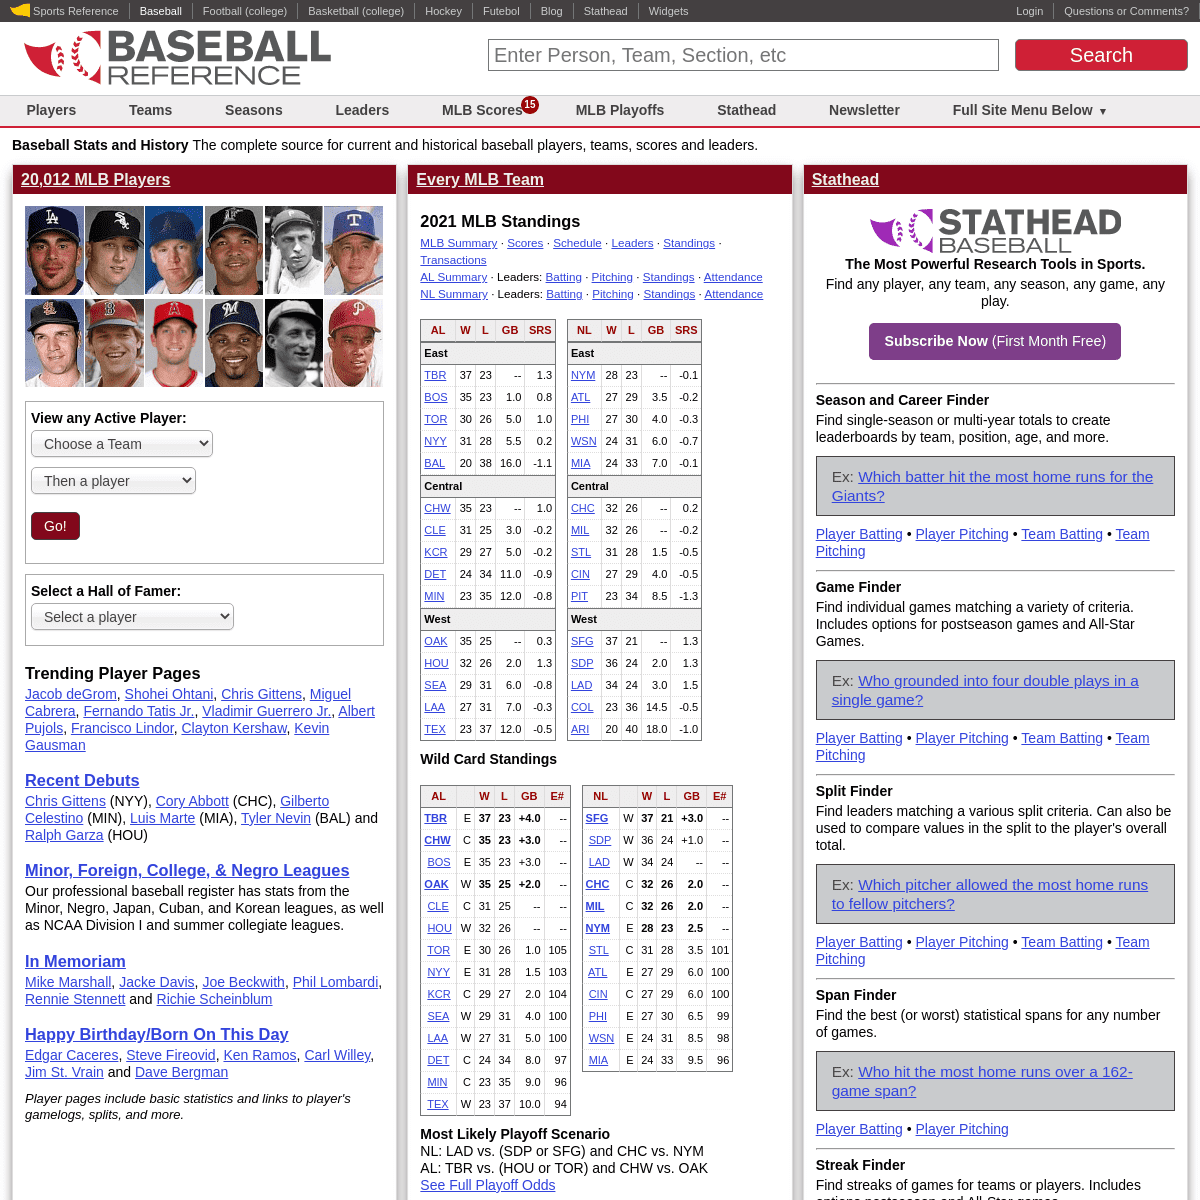 A complete backup of https://baseball-reference.com